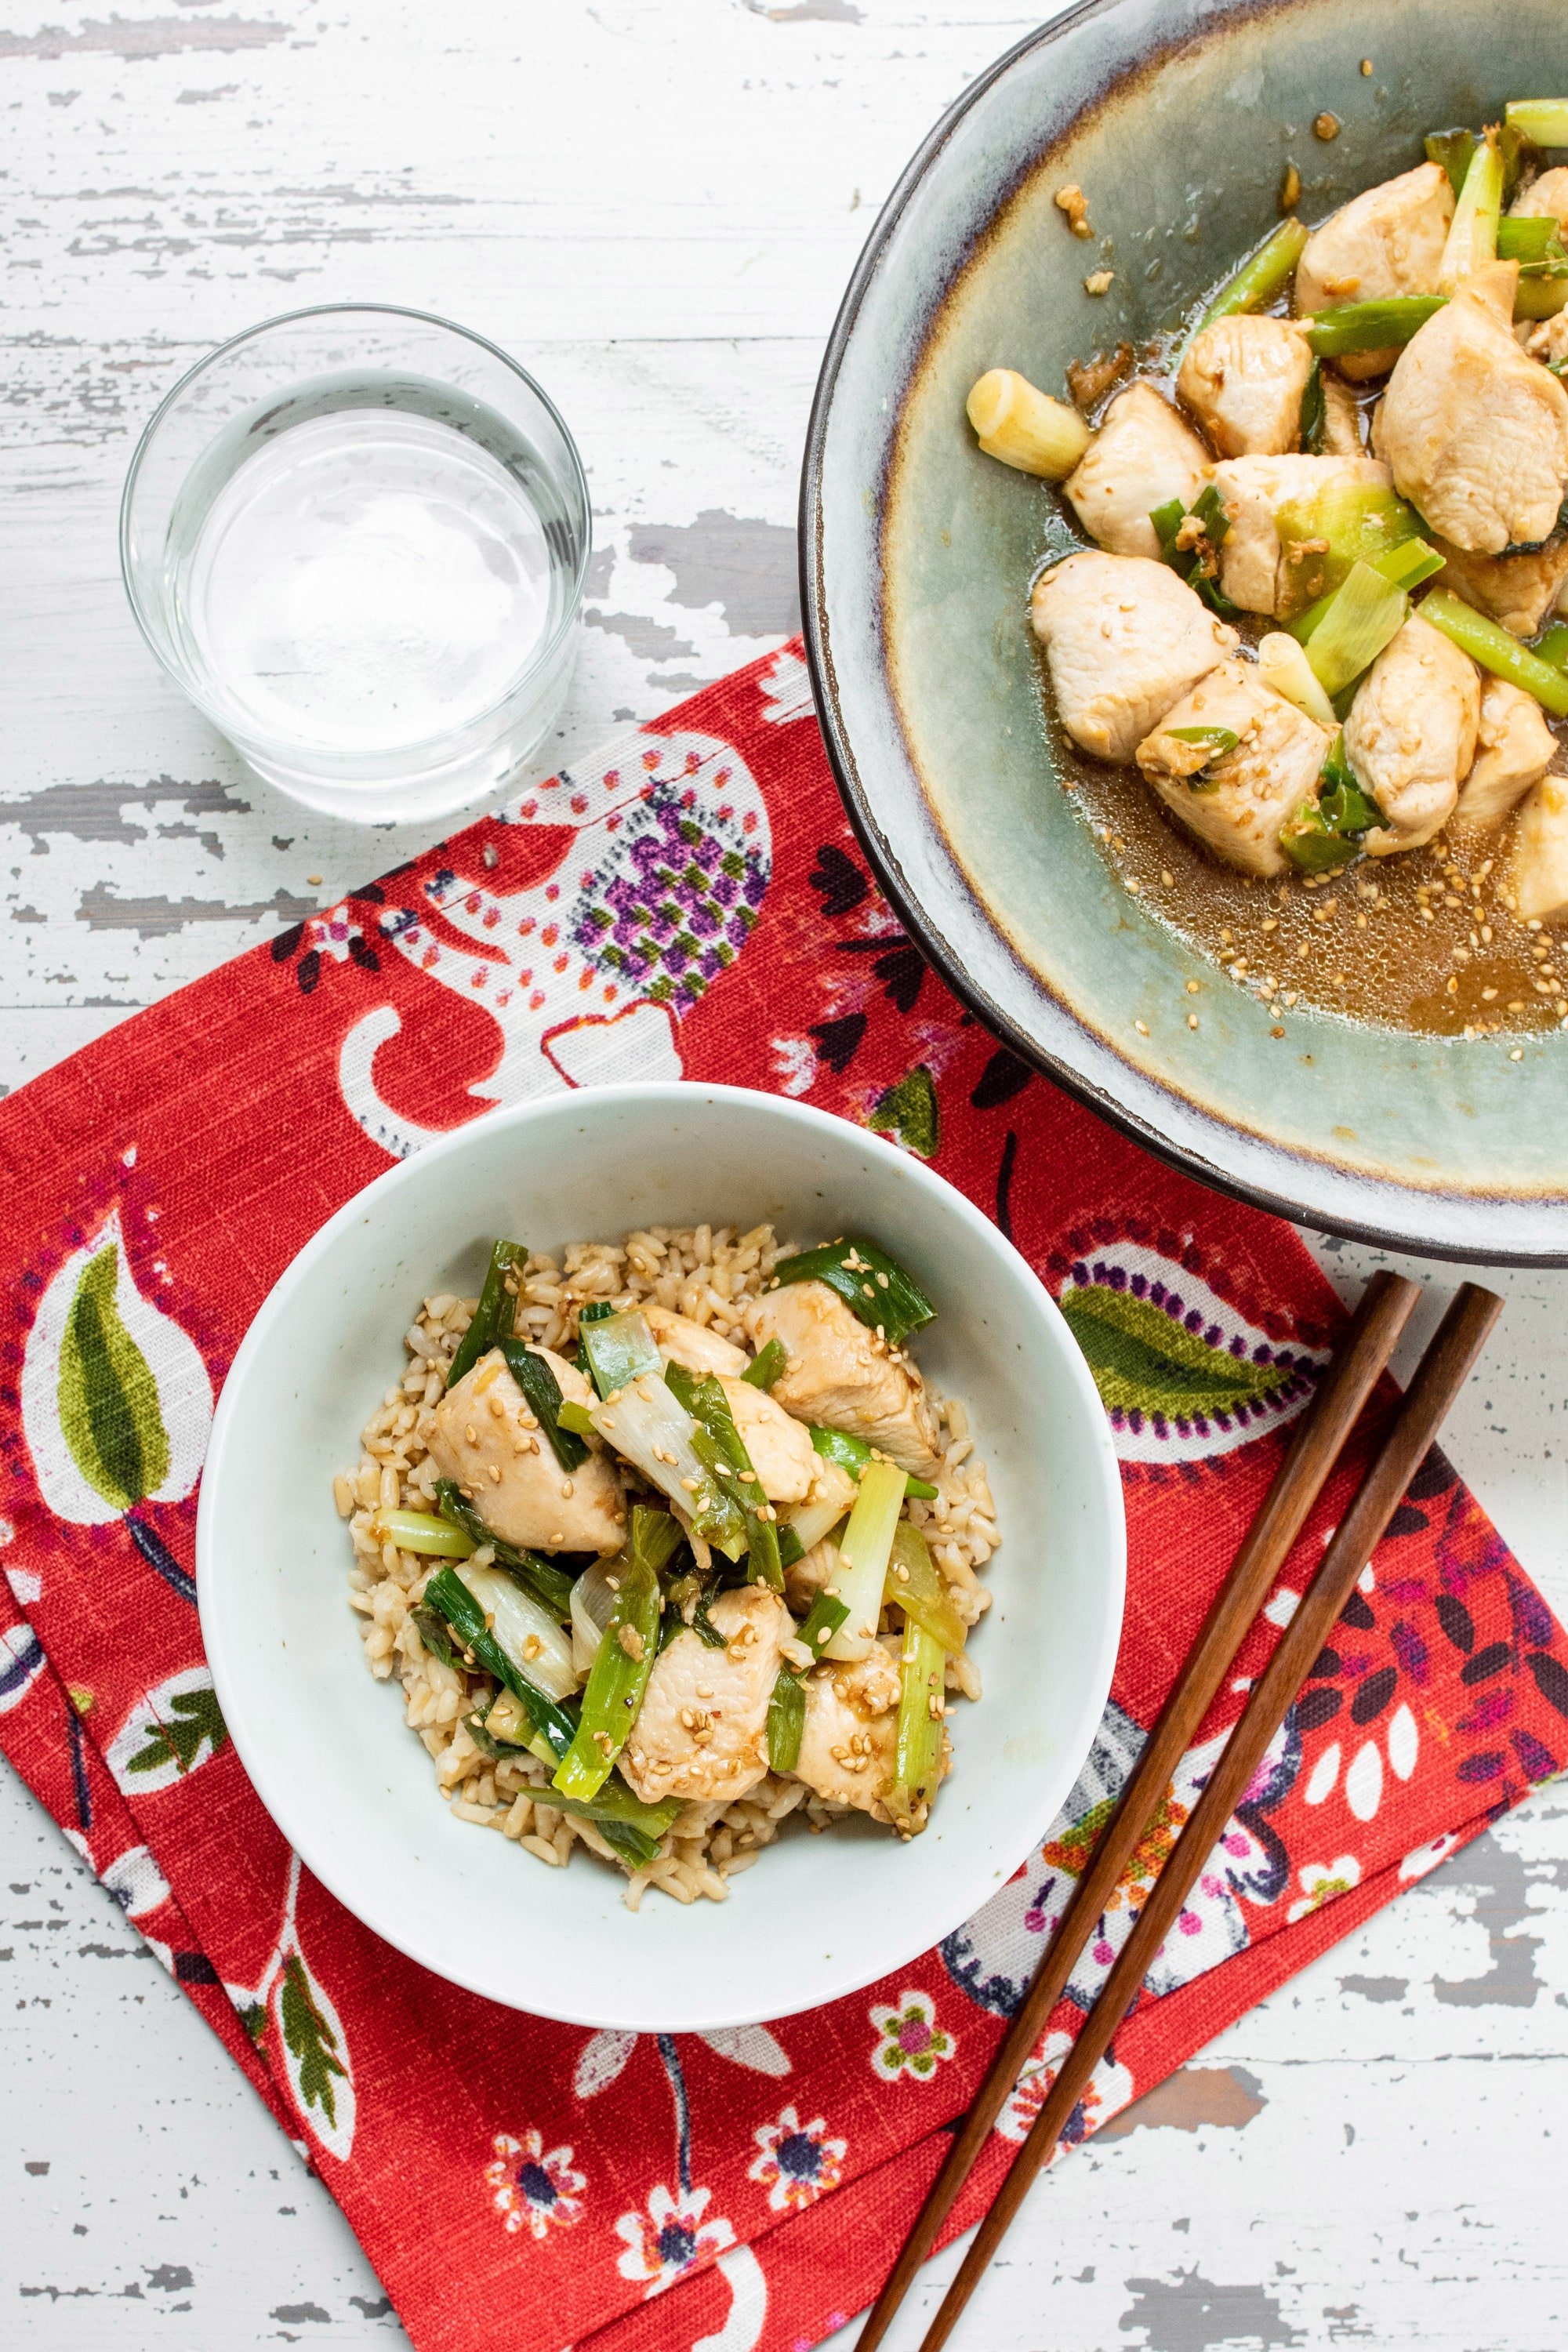 Two bowls of scallion-chicken stir fry on red placemat and white wood table.